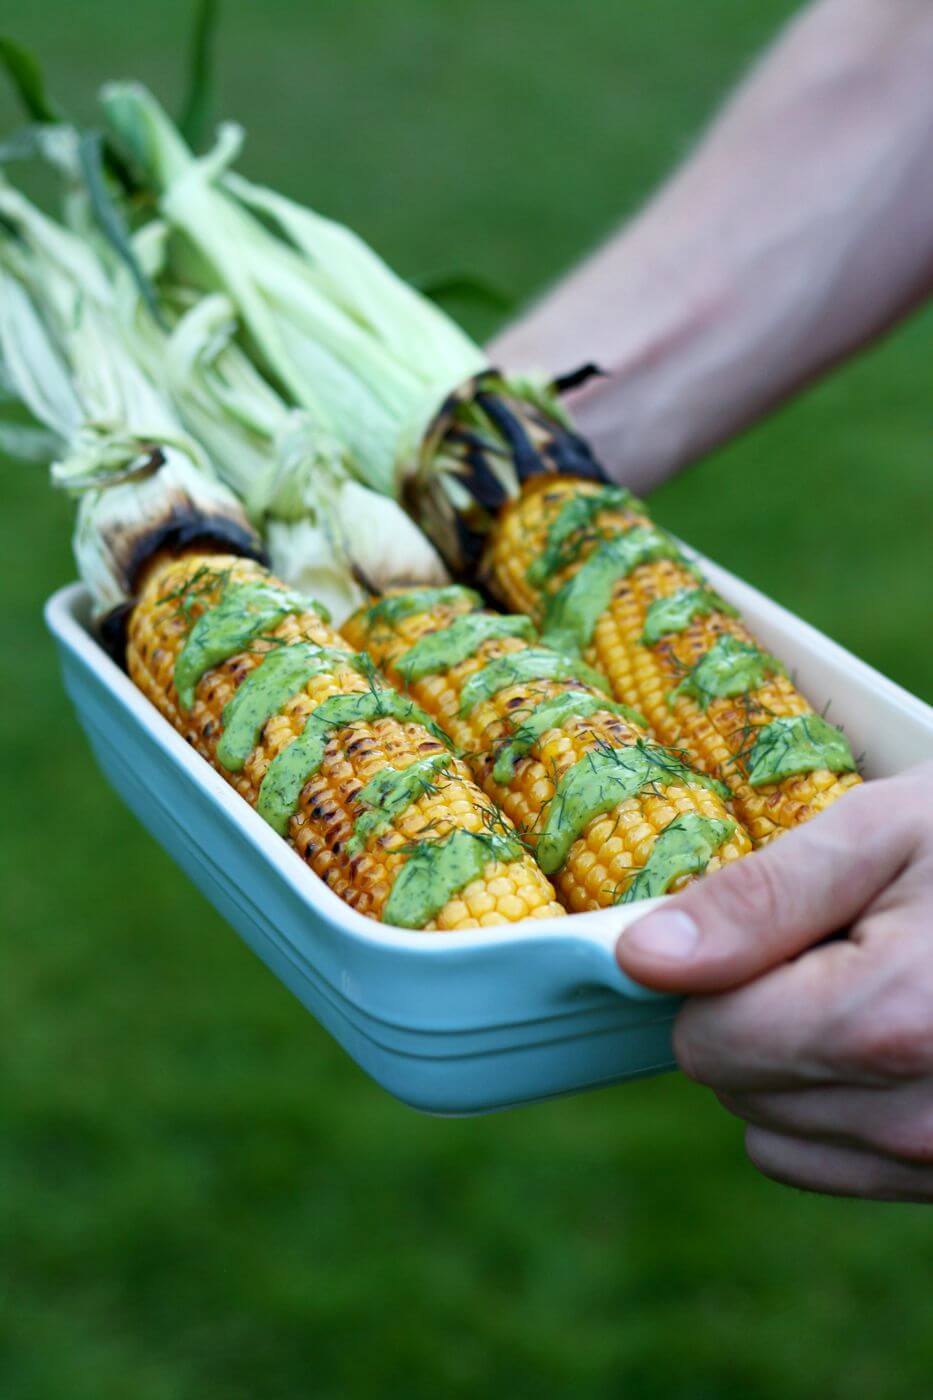 Grilled-corn-on-the-cob-avocado-dill-dressing-6